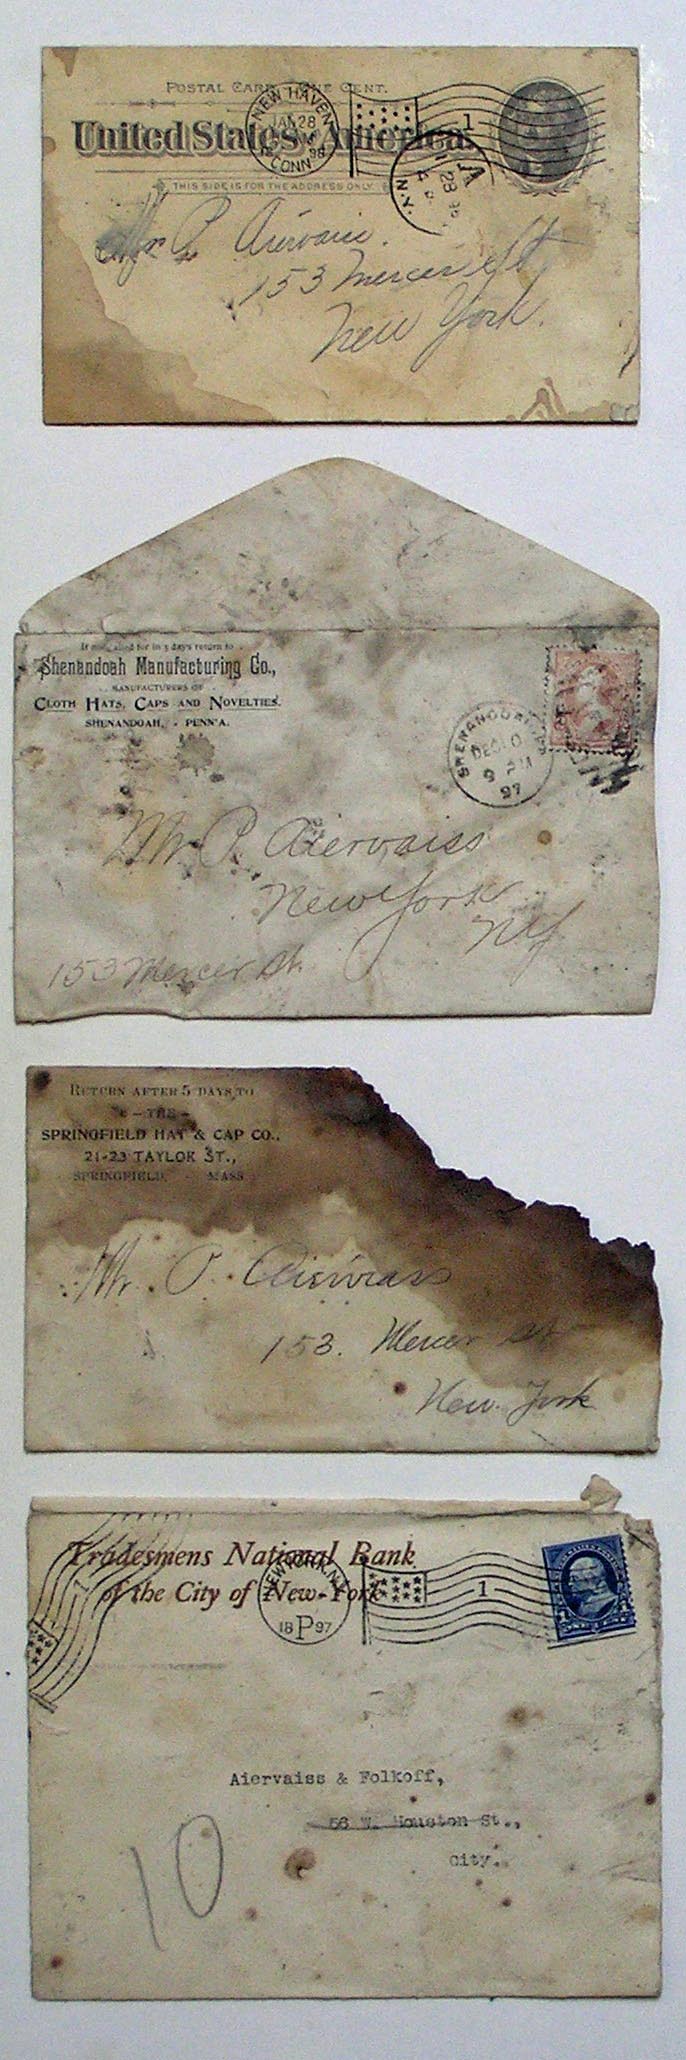 Mail addressed to P. Aiervaiss with late-19th century postmarks